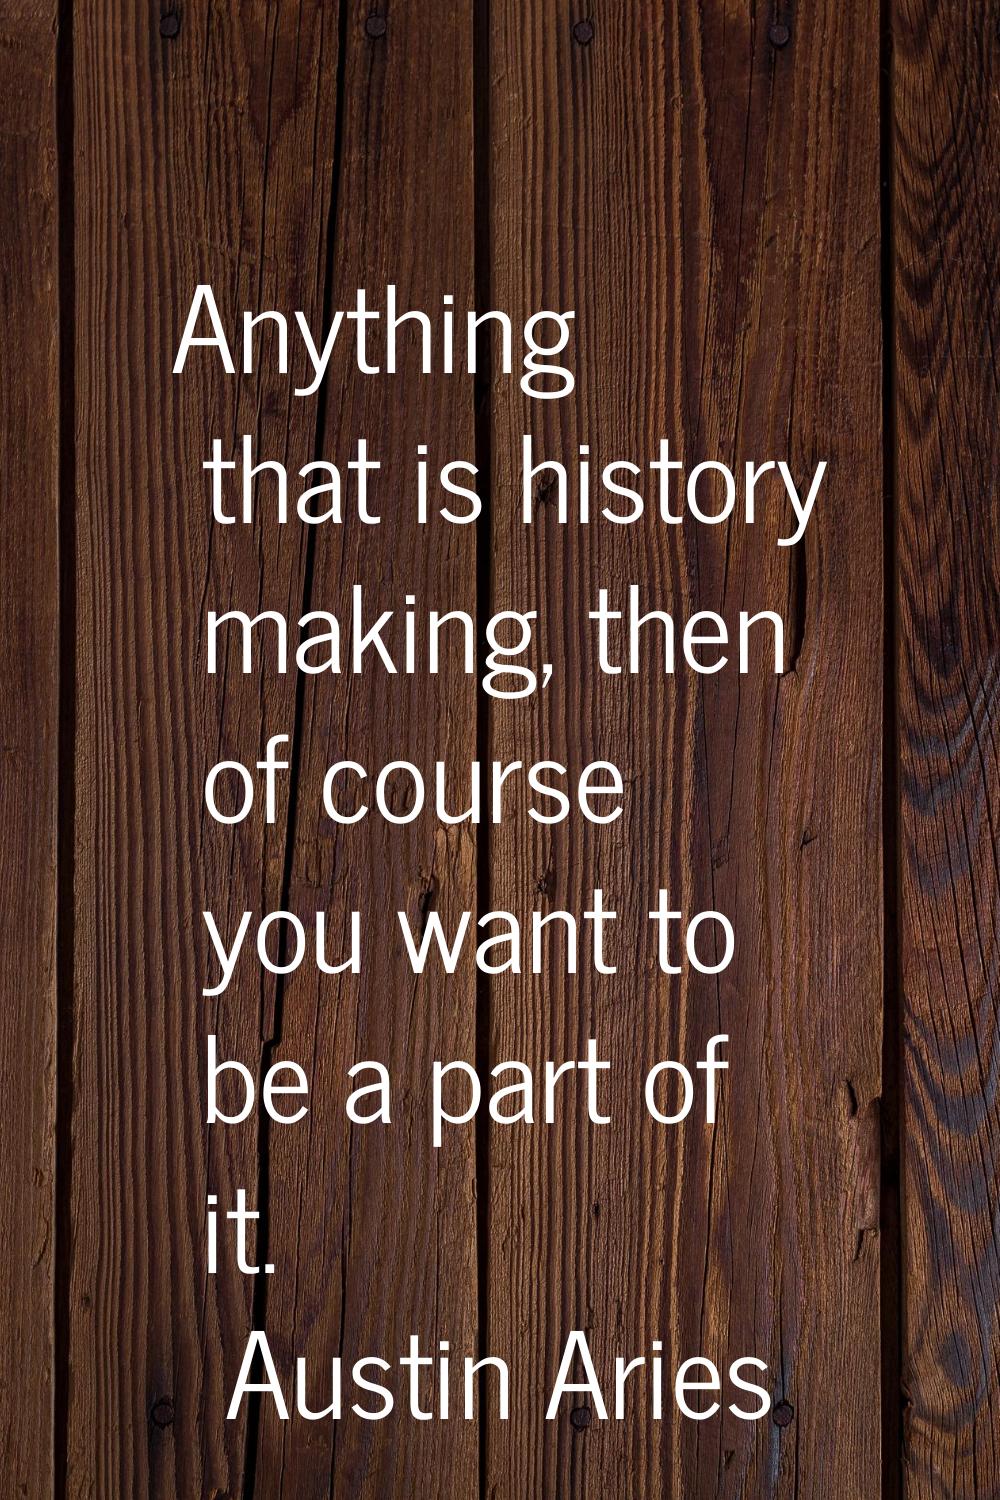 Anything that is history making, then of course you want to be a part of it.